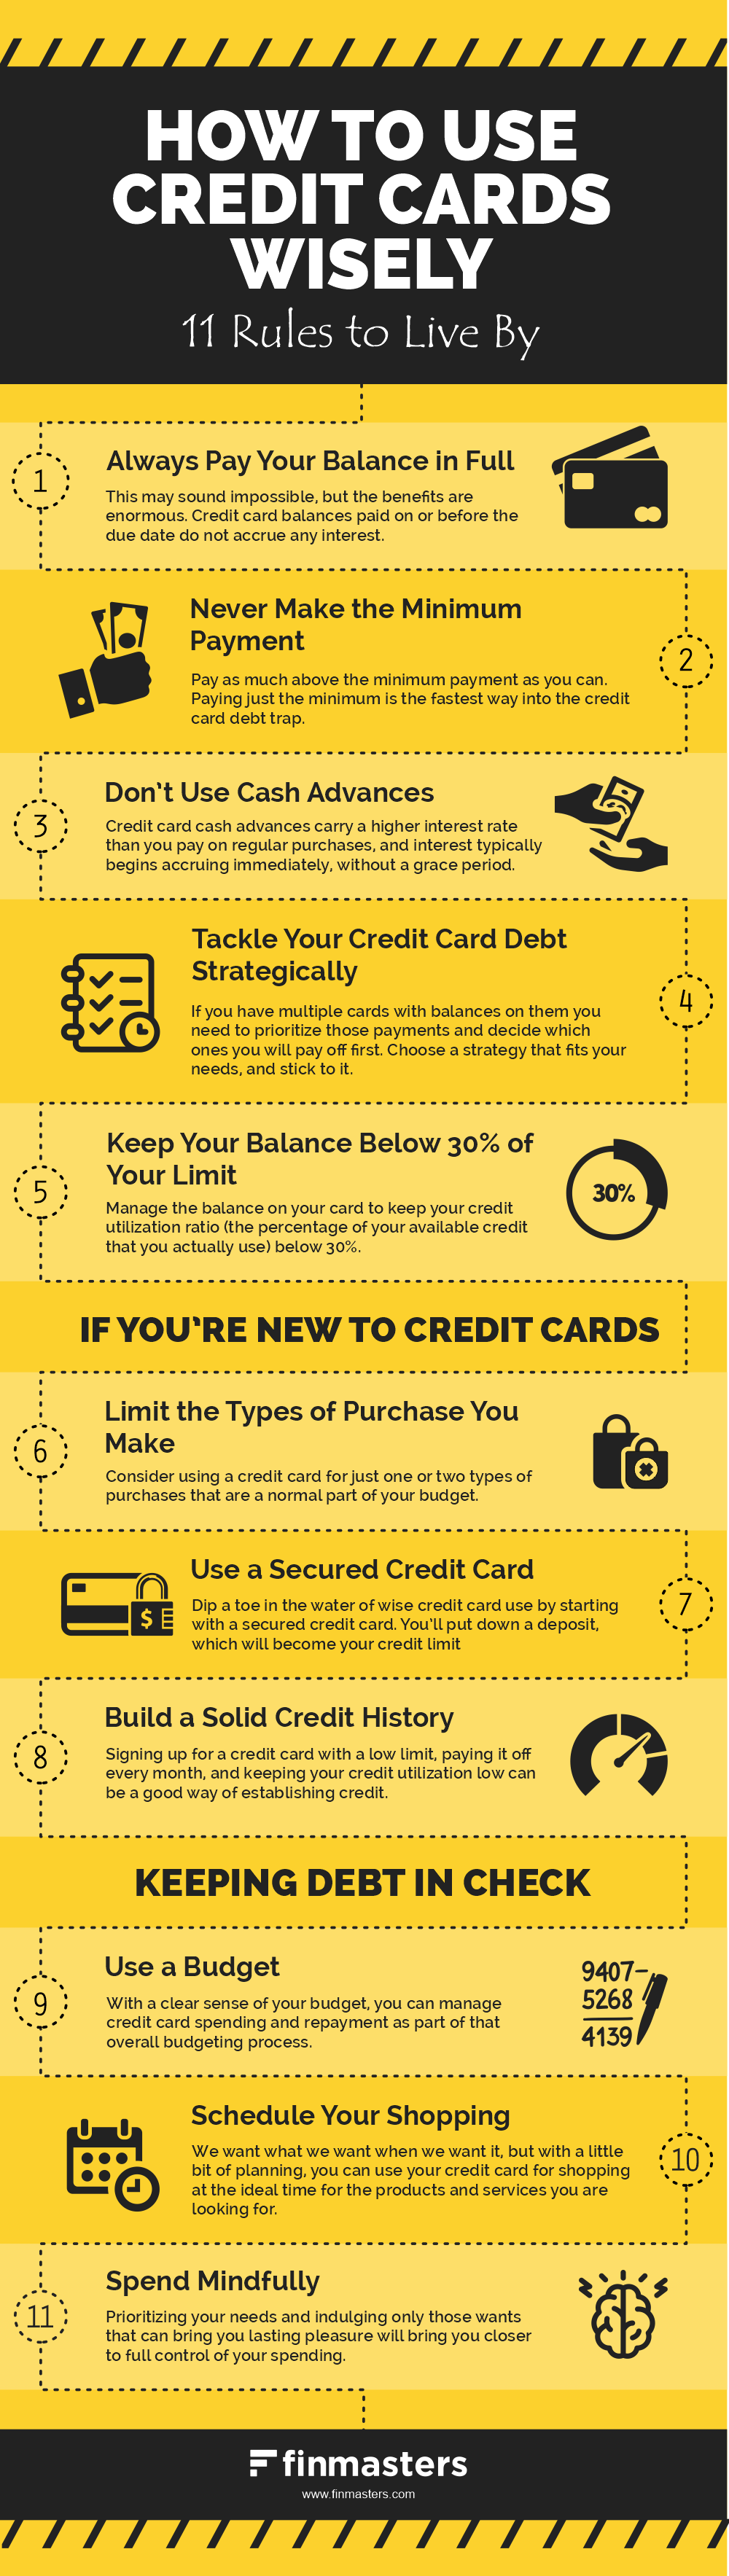 How to use credit cards wisely infographic